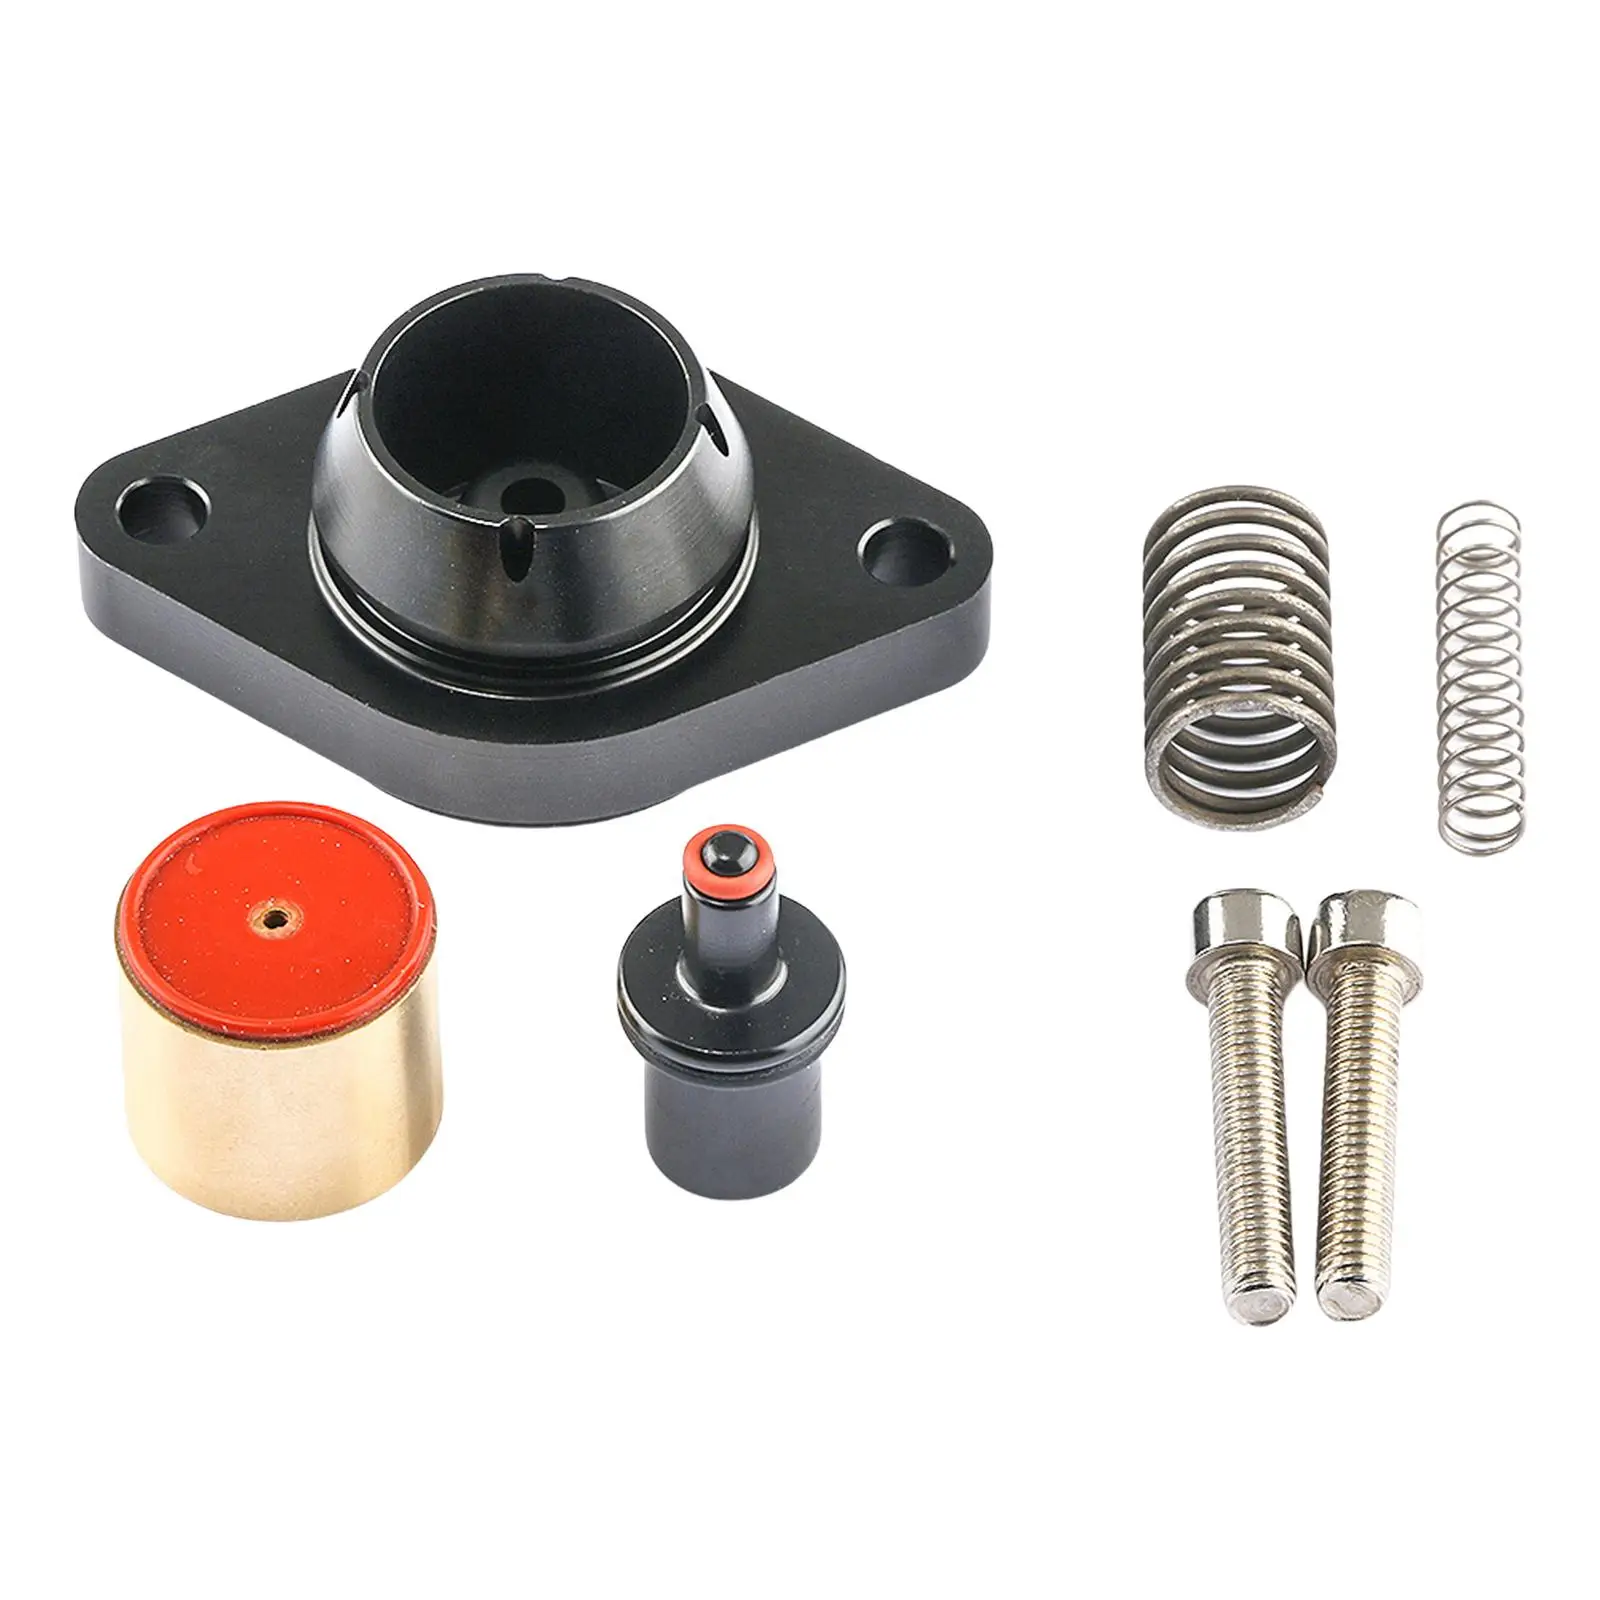 Pressure Relief Valve Base, Gfb T9355, Replacement Accessories, Spare Parts, for VW Jetta, 1.4 Tsi Twin Charged Engines